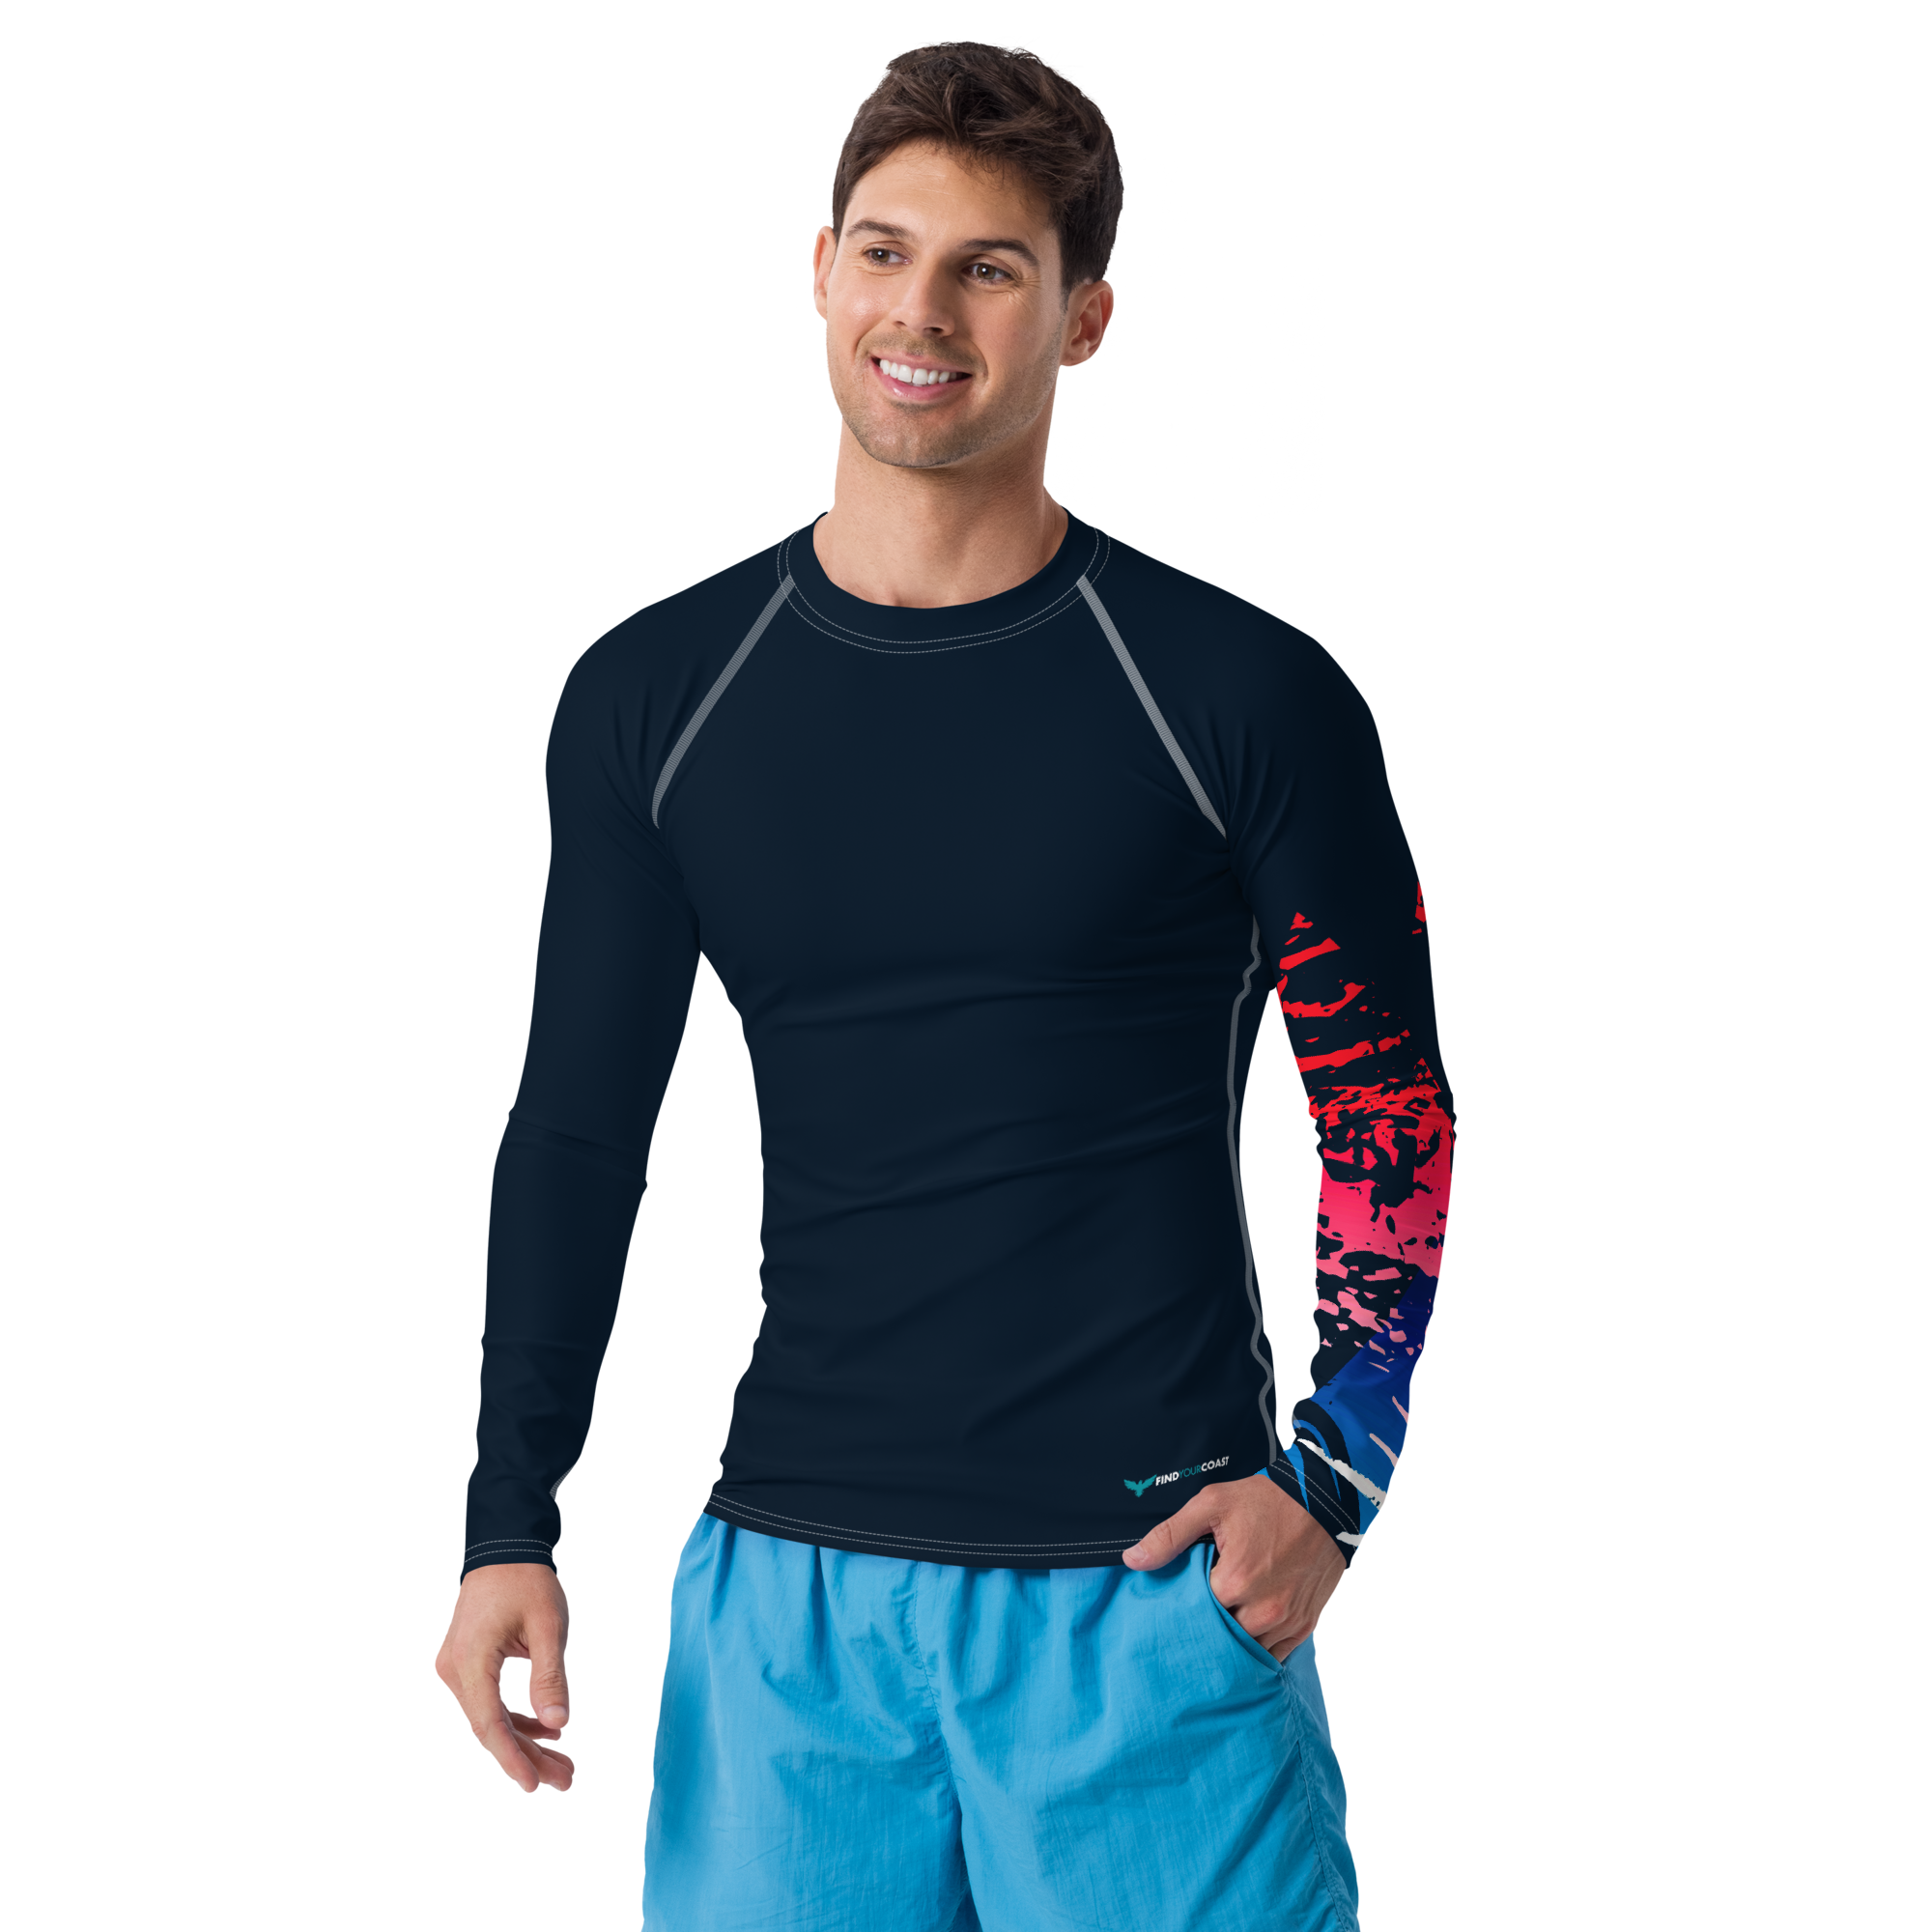 Men's Victory Sleeve Performance Rash Guard UPF 40+ FIND YOUR COAST  CO